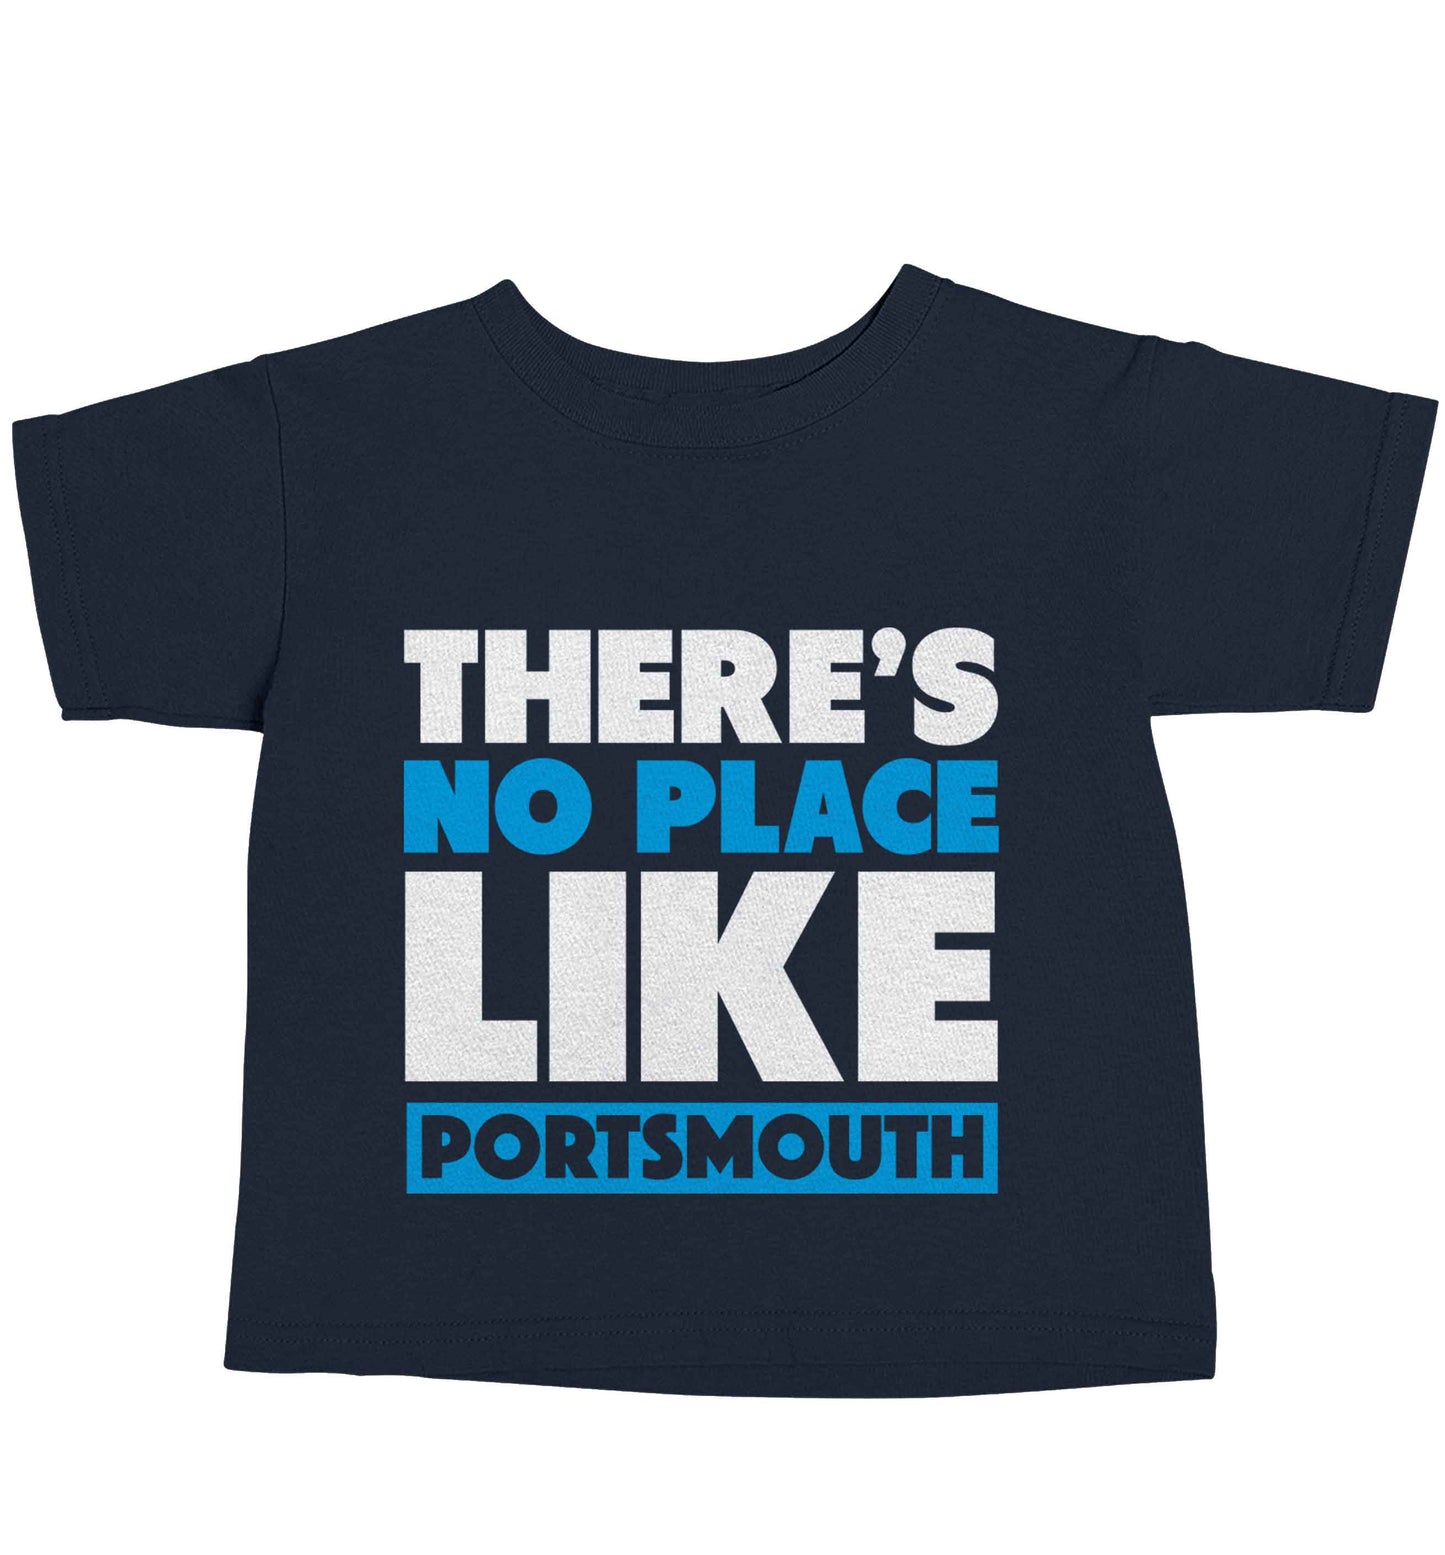 There's no place like Porstmouth navy baby toddler Tshirt 2 Years